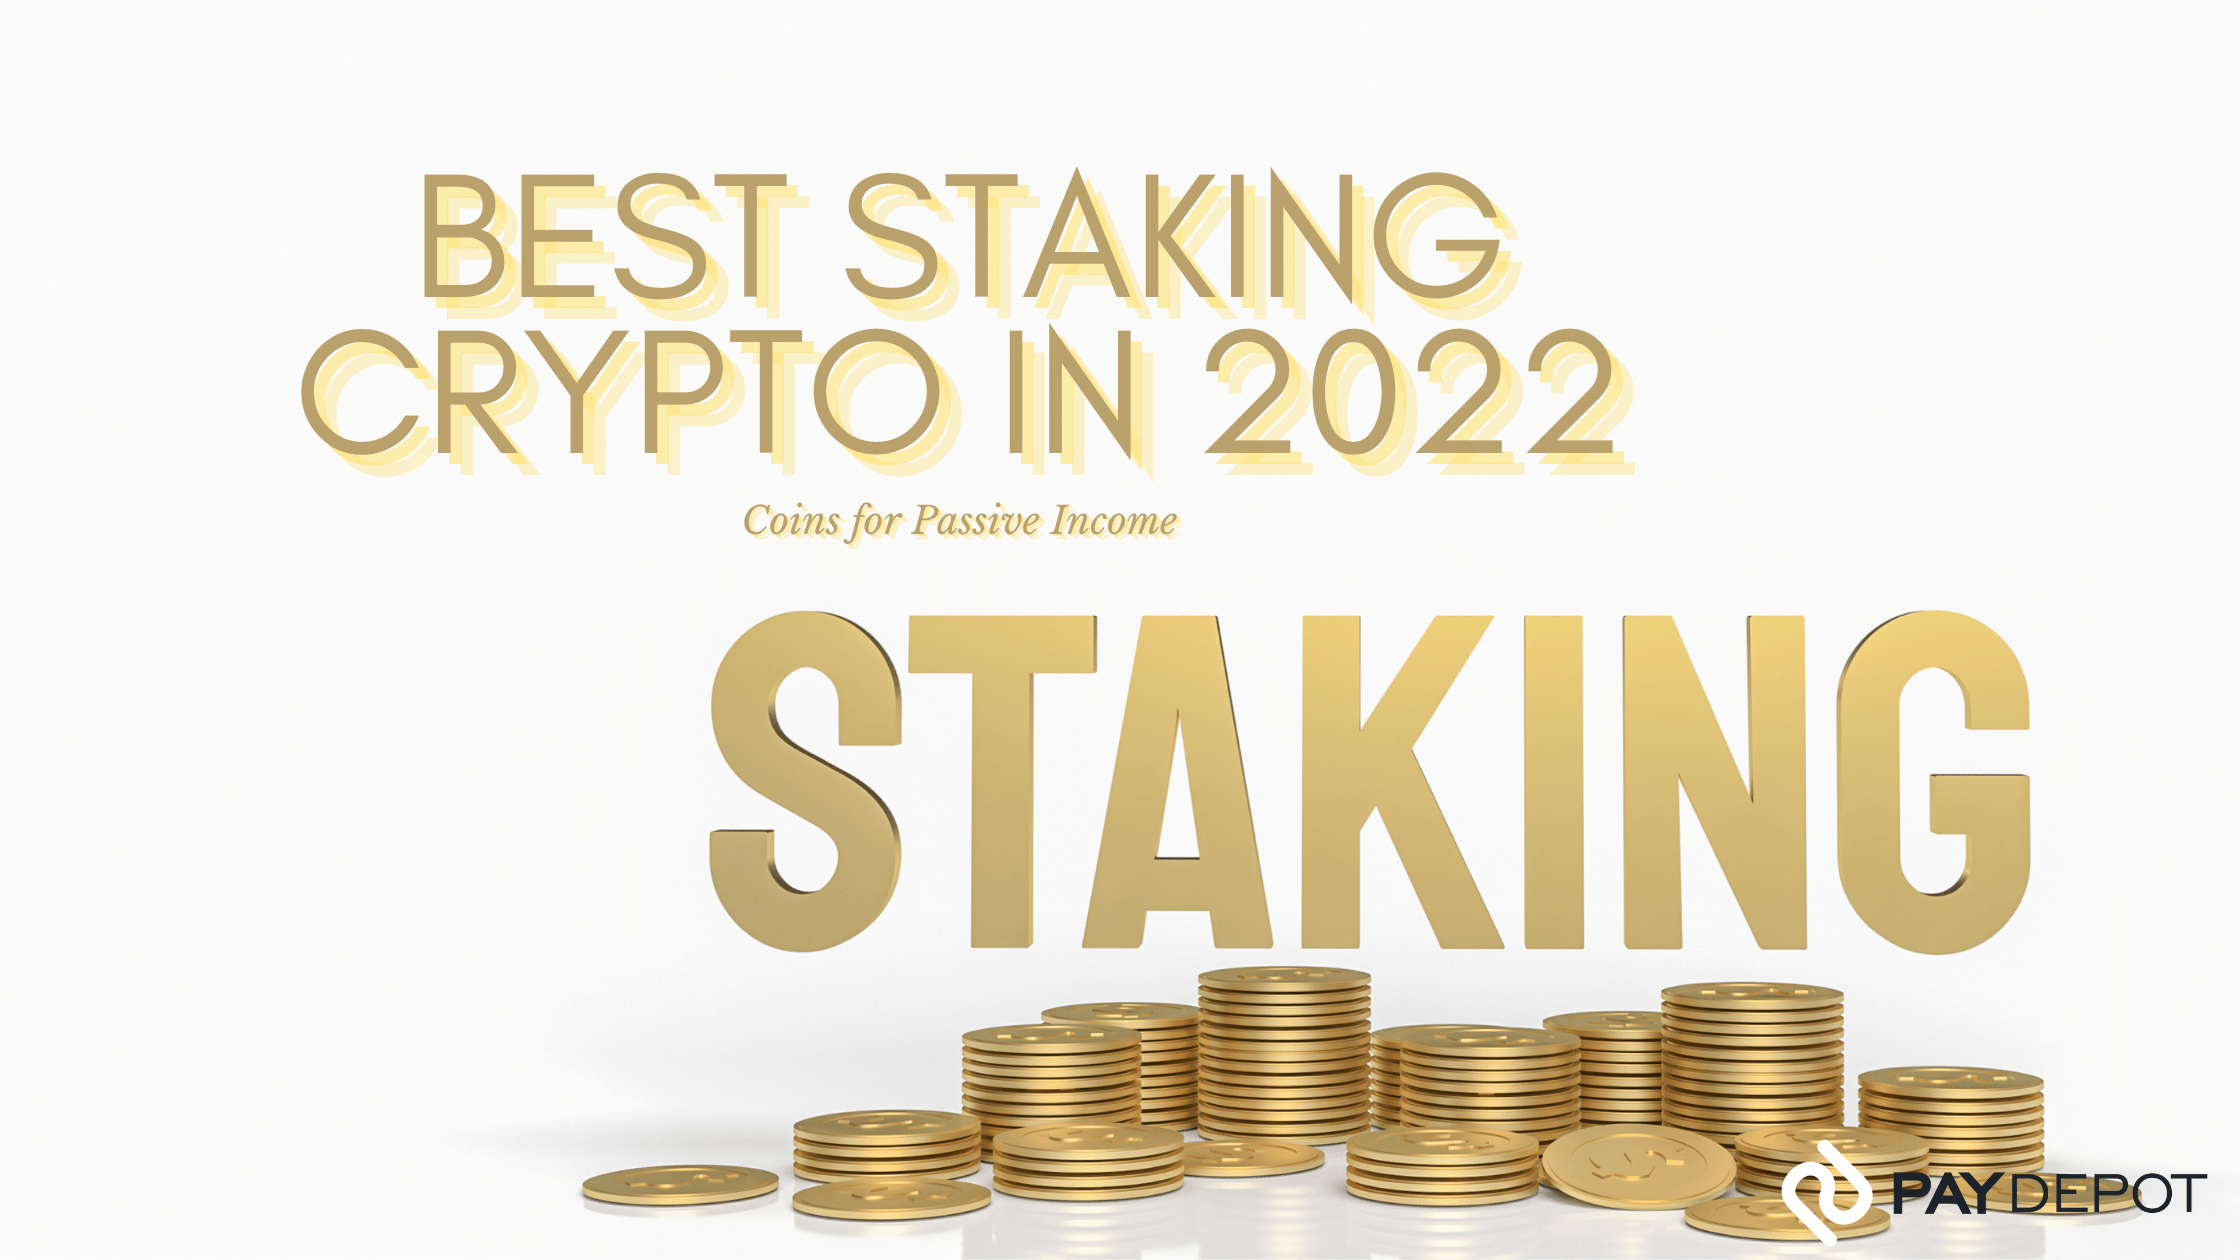 Best Staking Crypto in 2022: Coins for Passive Income